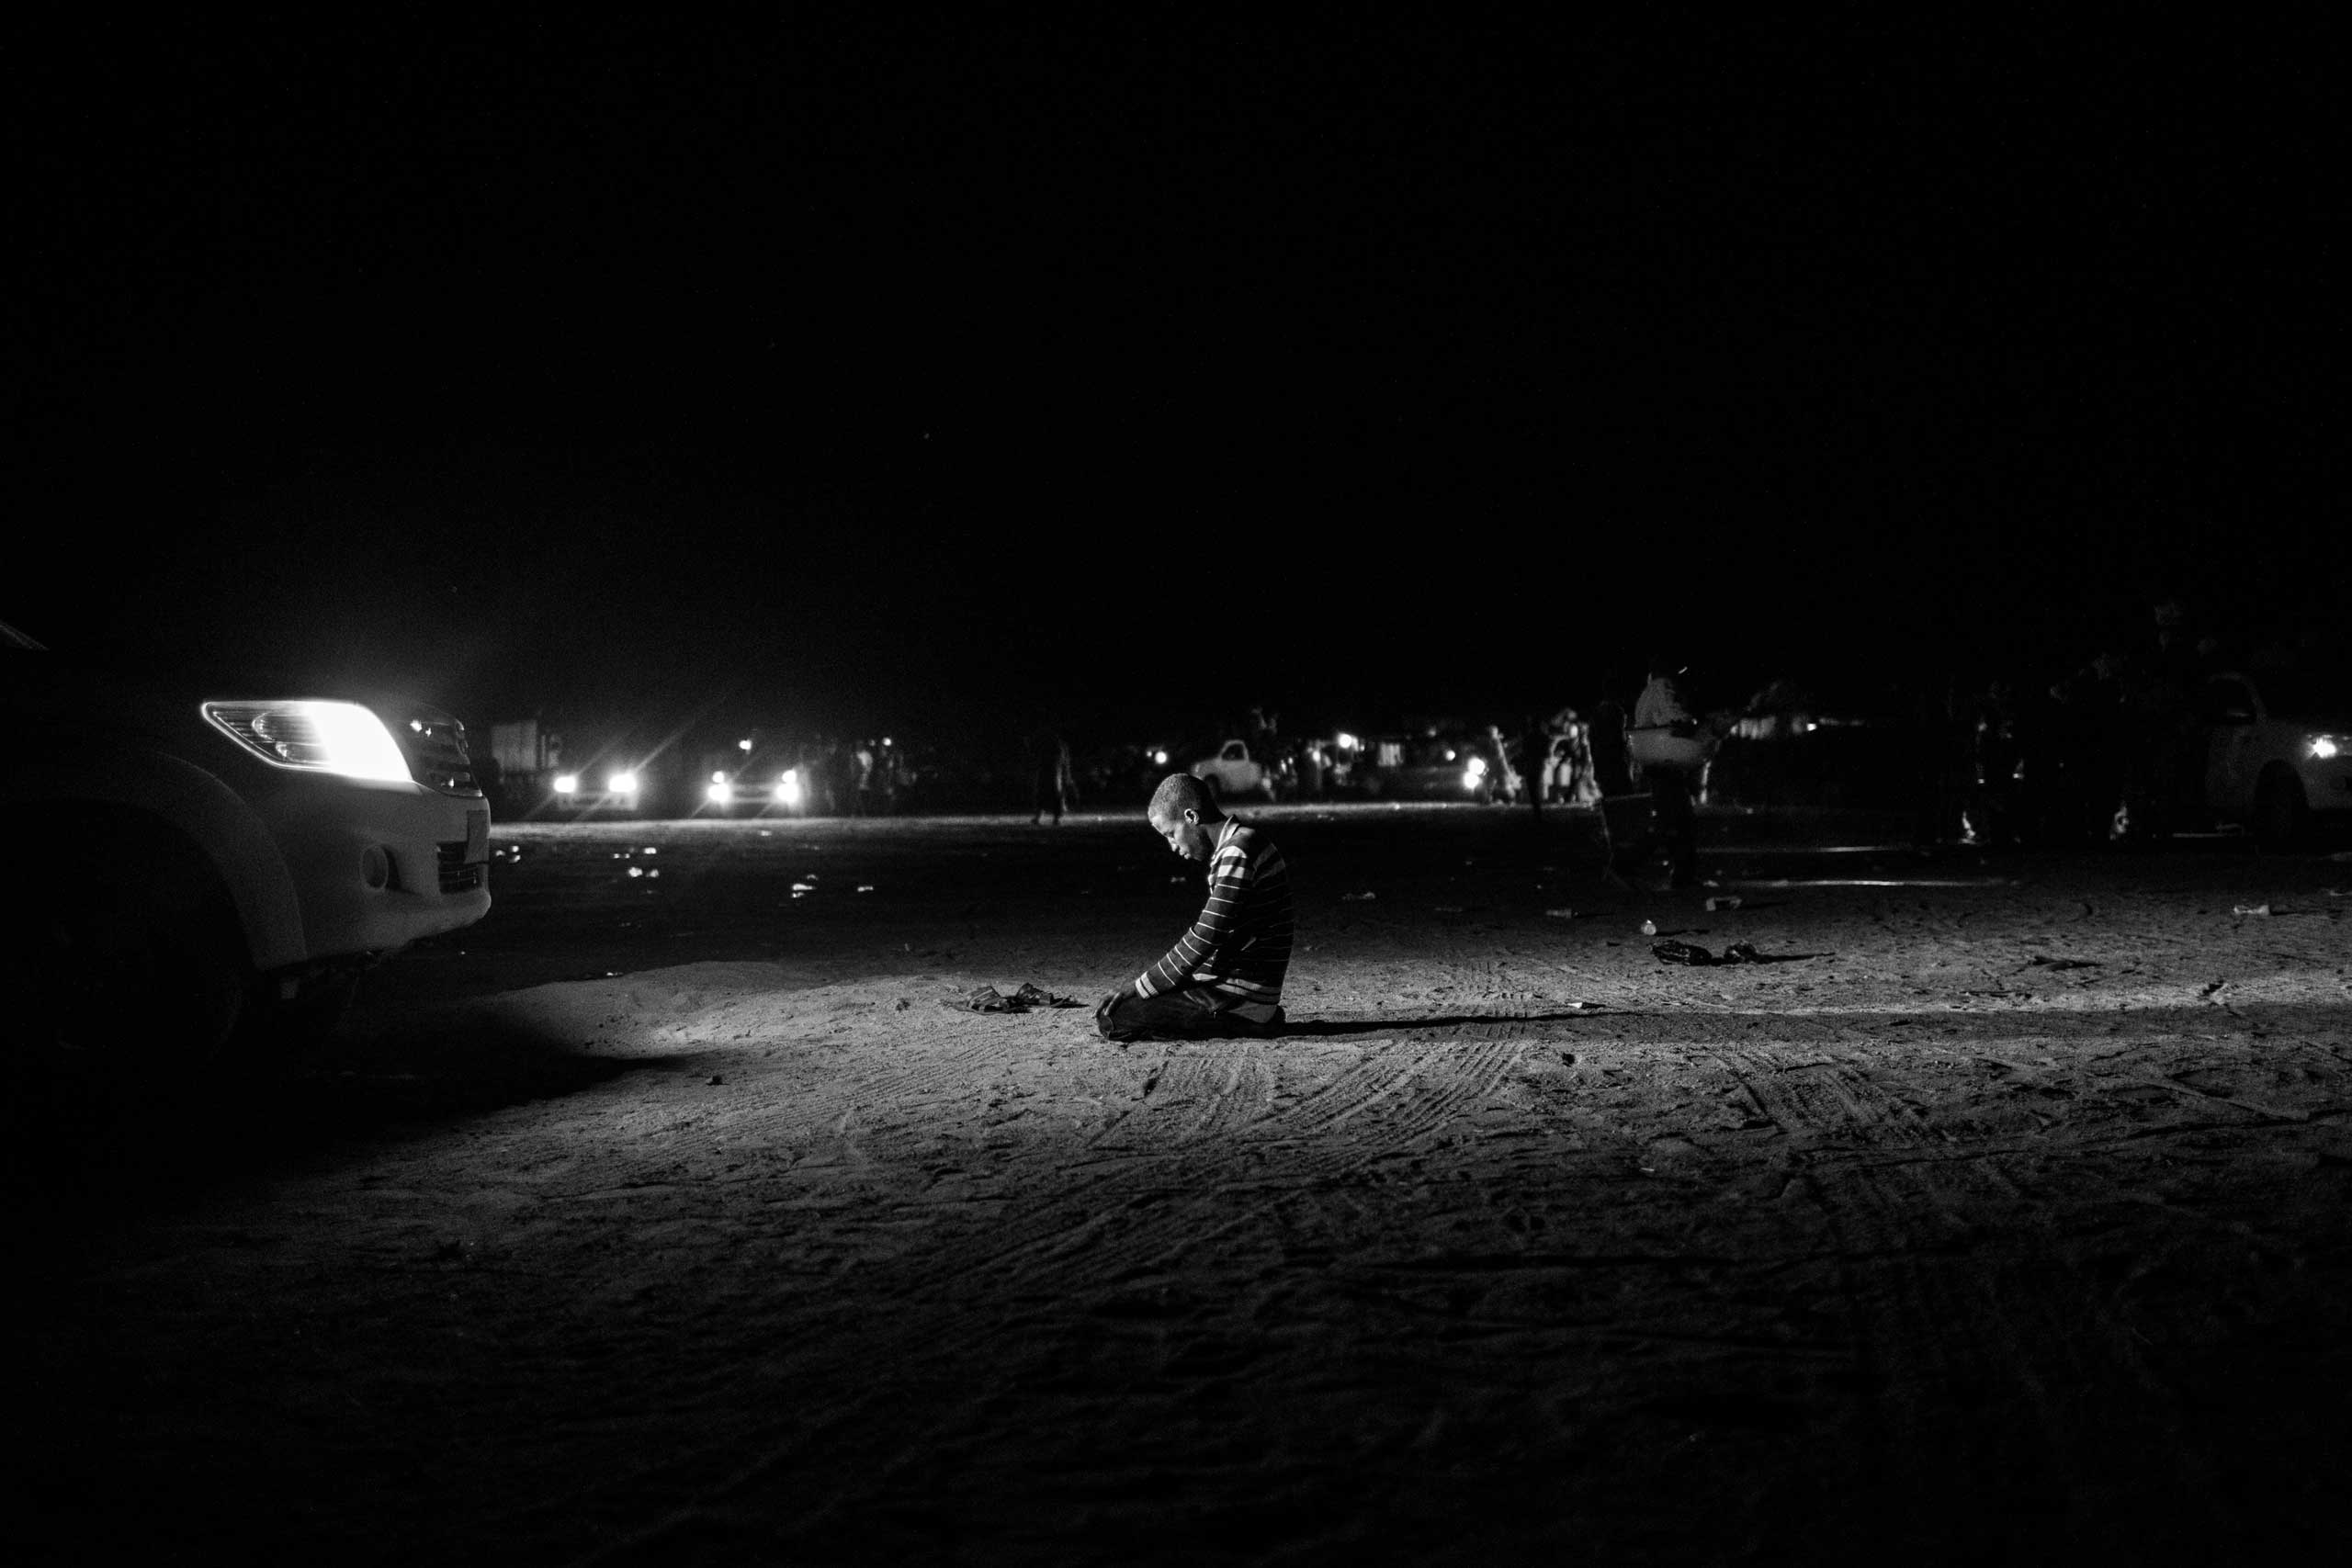 A migrant prays in the headlights of a pickup truck carrying him to Libya.